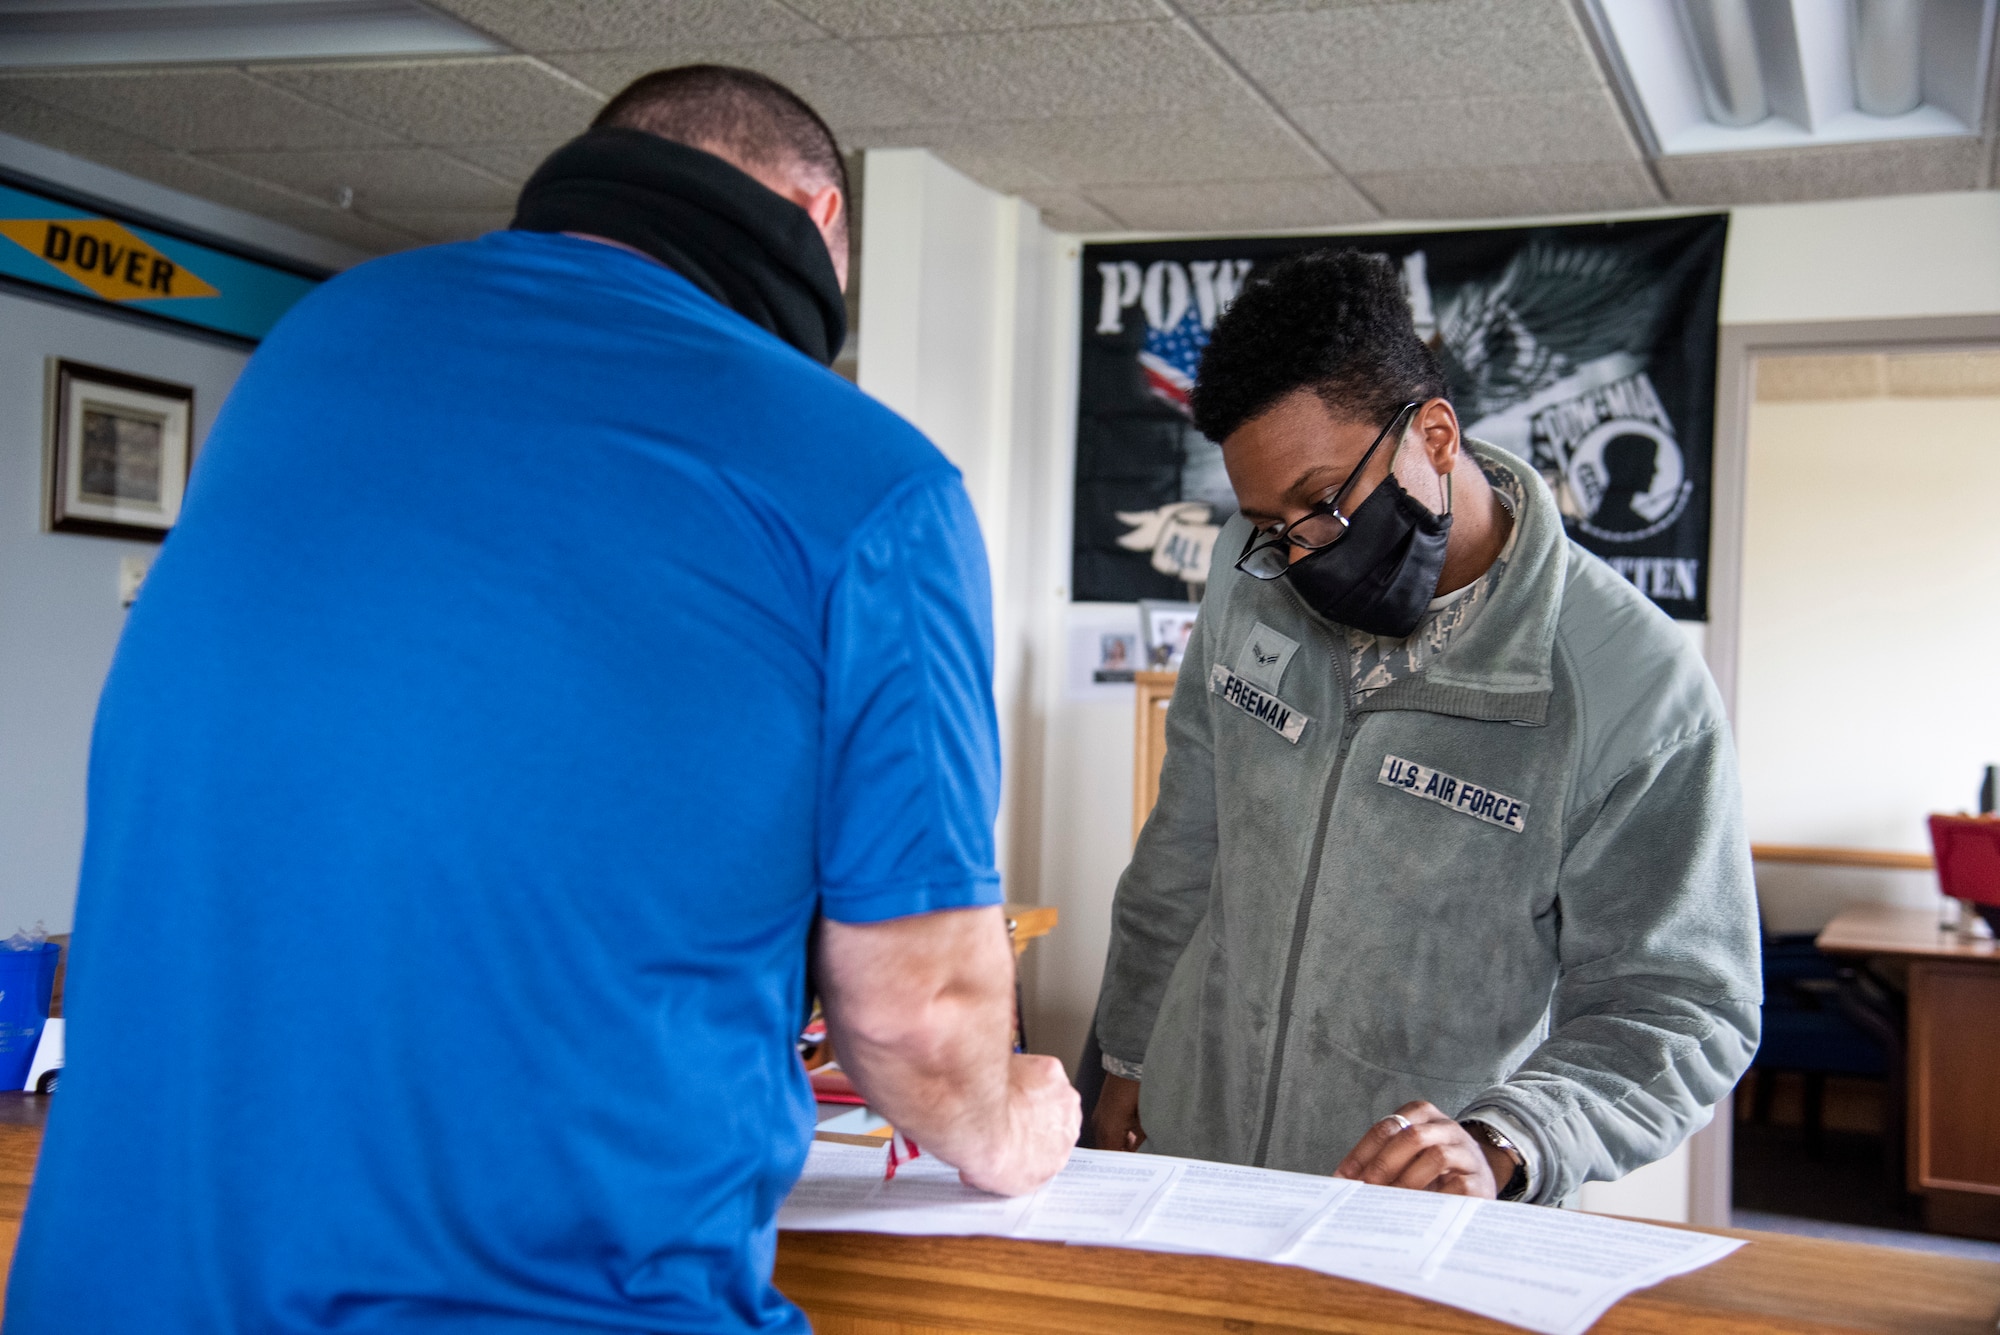 Tech. Sgt. Chuck Broadway, 436th Airlift Wing public affairs NCOIC of media (left), reviews paperwork given to him by Airman 1st Class Malik Freeman, 436th Airlift Wing Legal Office paralegal (right), May 1, 2020, at Dover Air Force Base, Delaware. To combat the spread of COVID-19, those coming in for appointments are asked to bring their own pens. (U.S. Air Force photo by Airman 1st Class Jonathan Harding)